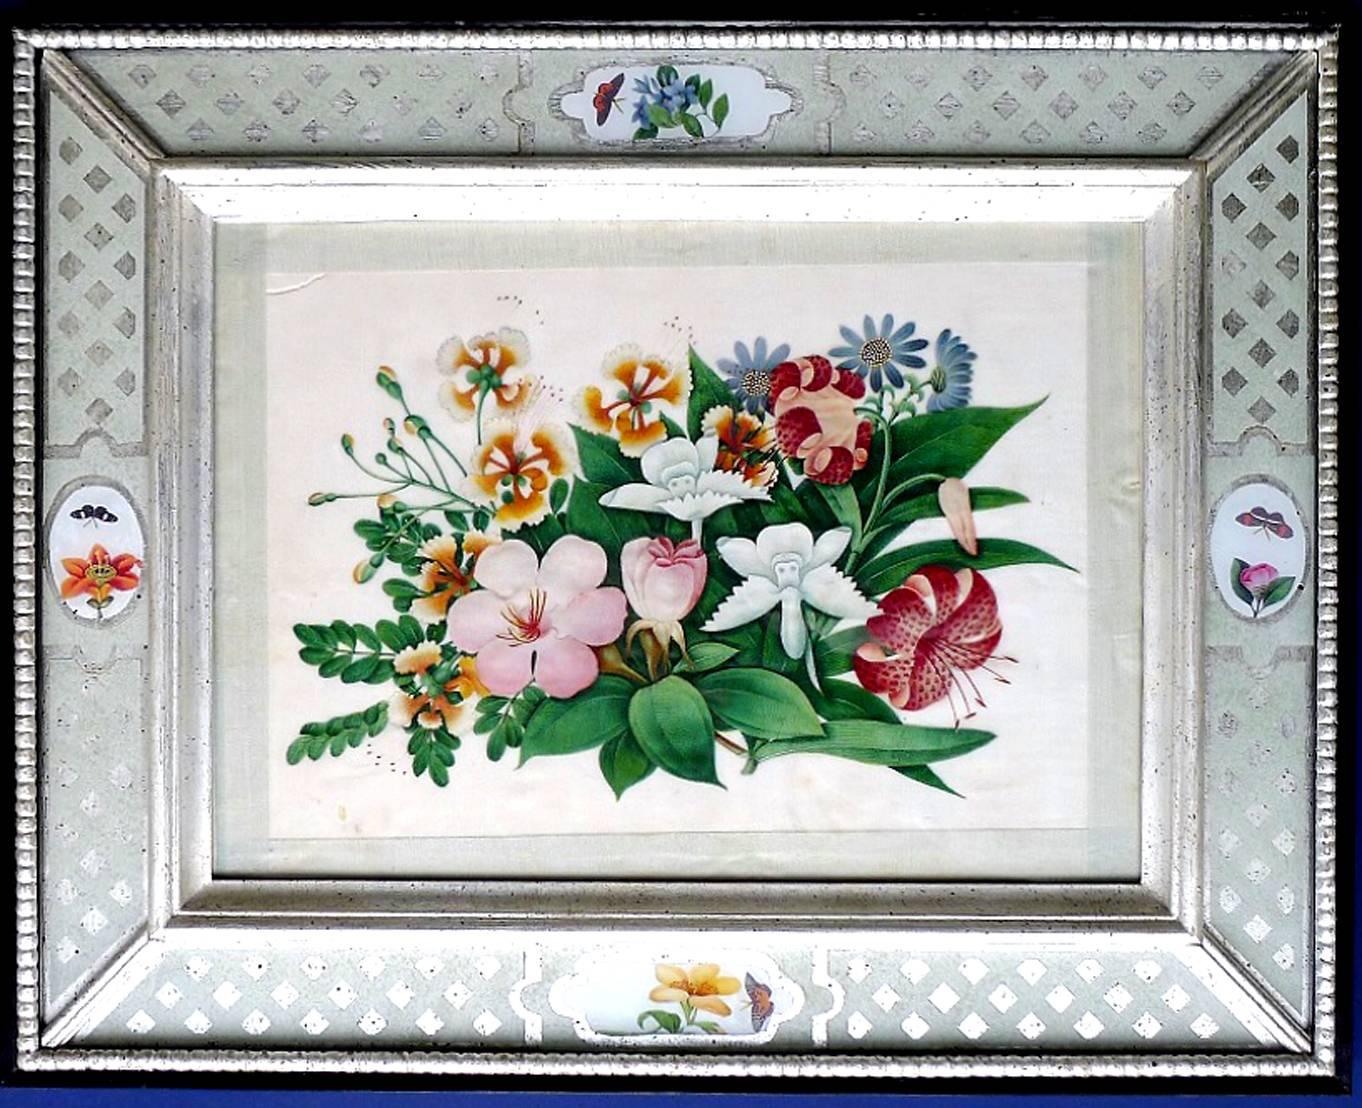 China trade set of twelve botanical flower pith paper paintings,
decoupage frames,
circa 1840.

The set of twelve fine paintings of flowers on pith paper with original silks within beautiful decoupage frames
These most delicate and detailed